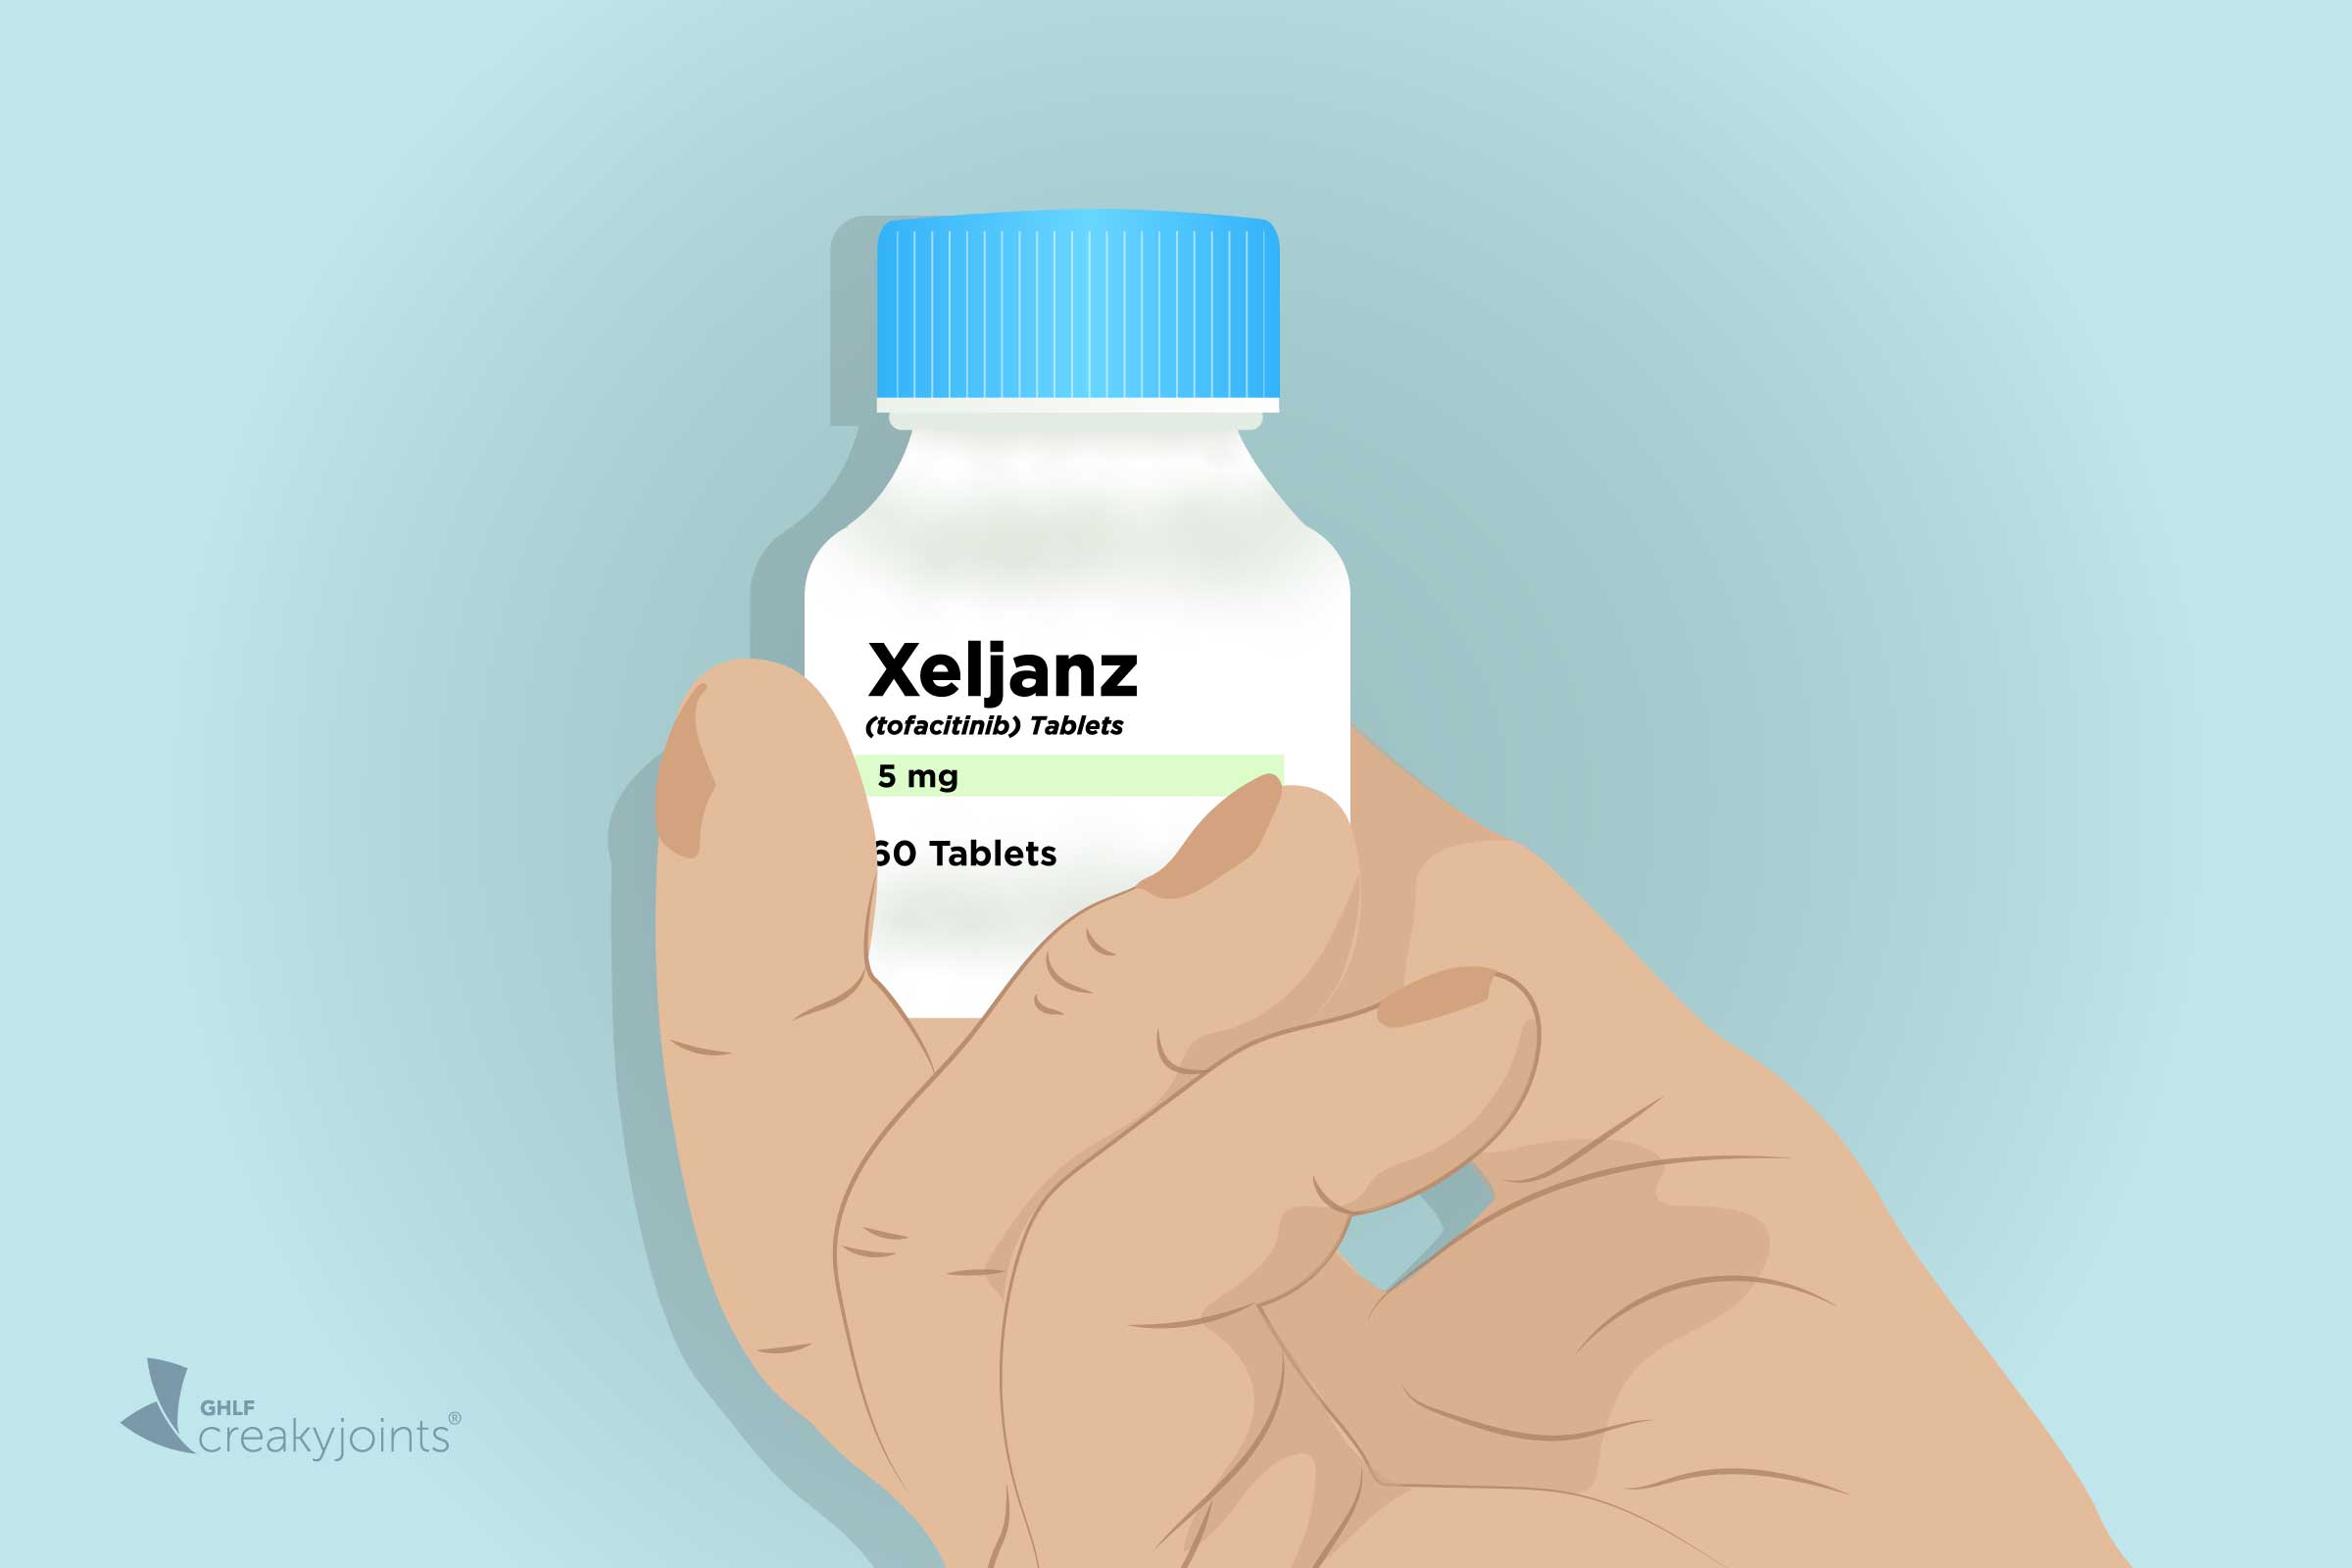 xeljanz-study-raises-safety-concerns-about-heart-and-cancer-risks